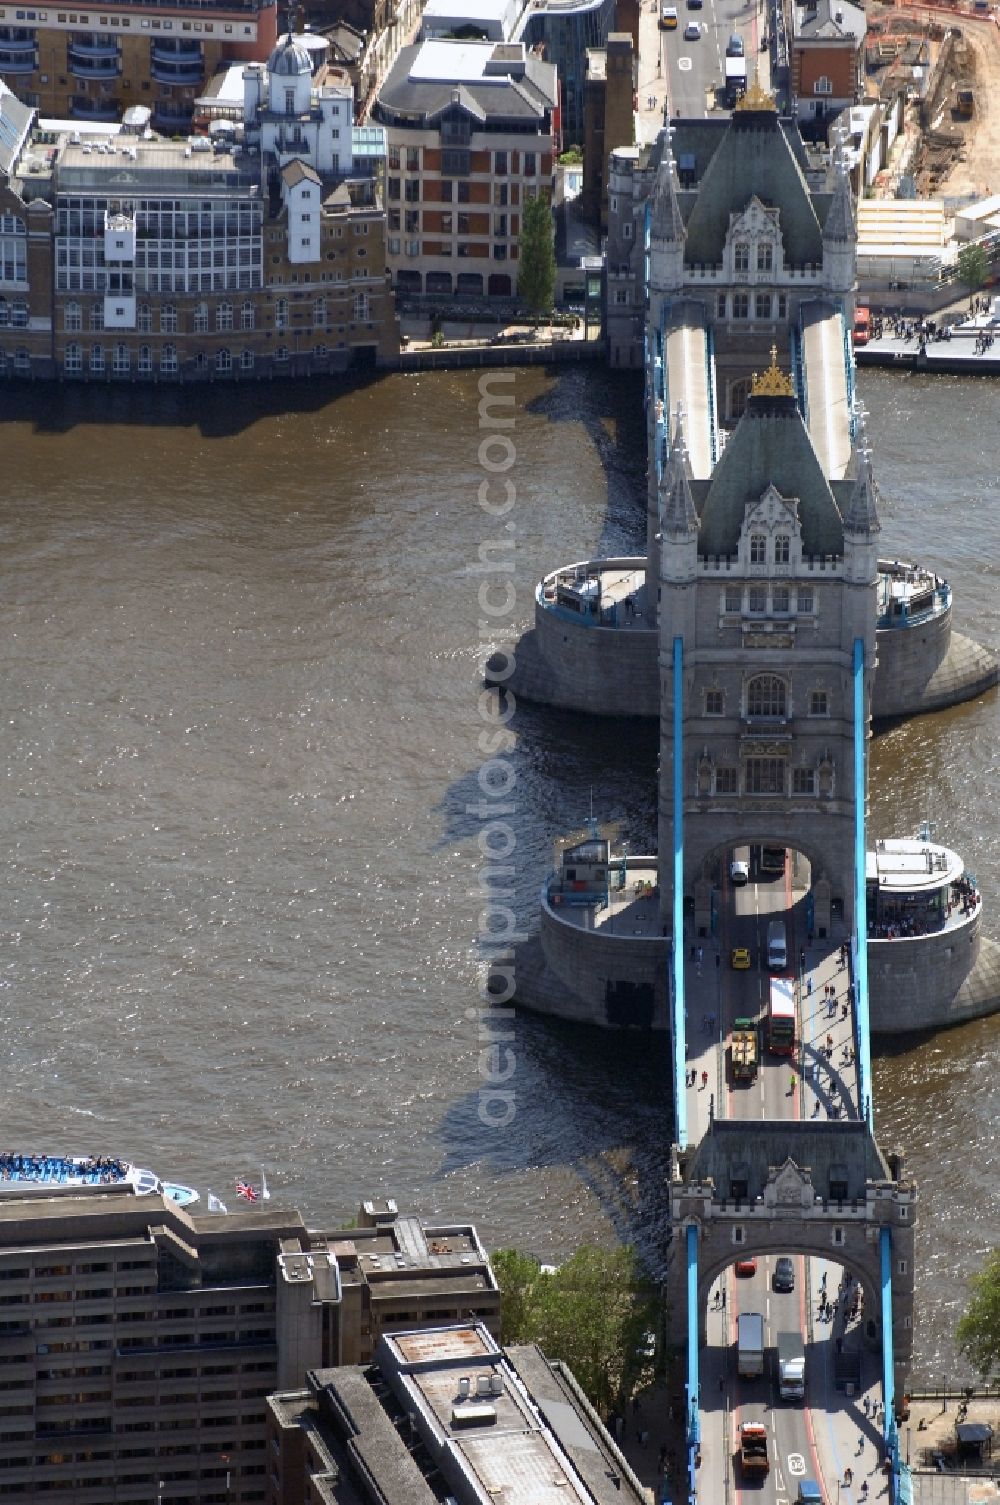 London from the bird's eye view: View of Tower Bridge on the banks of the Thames - the symbol of London